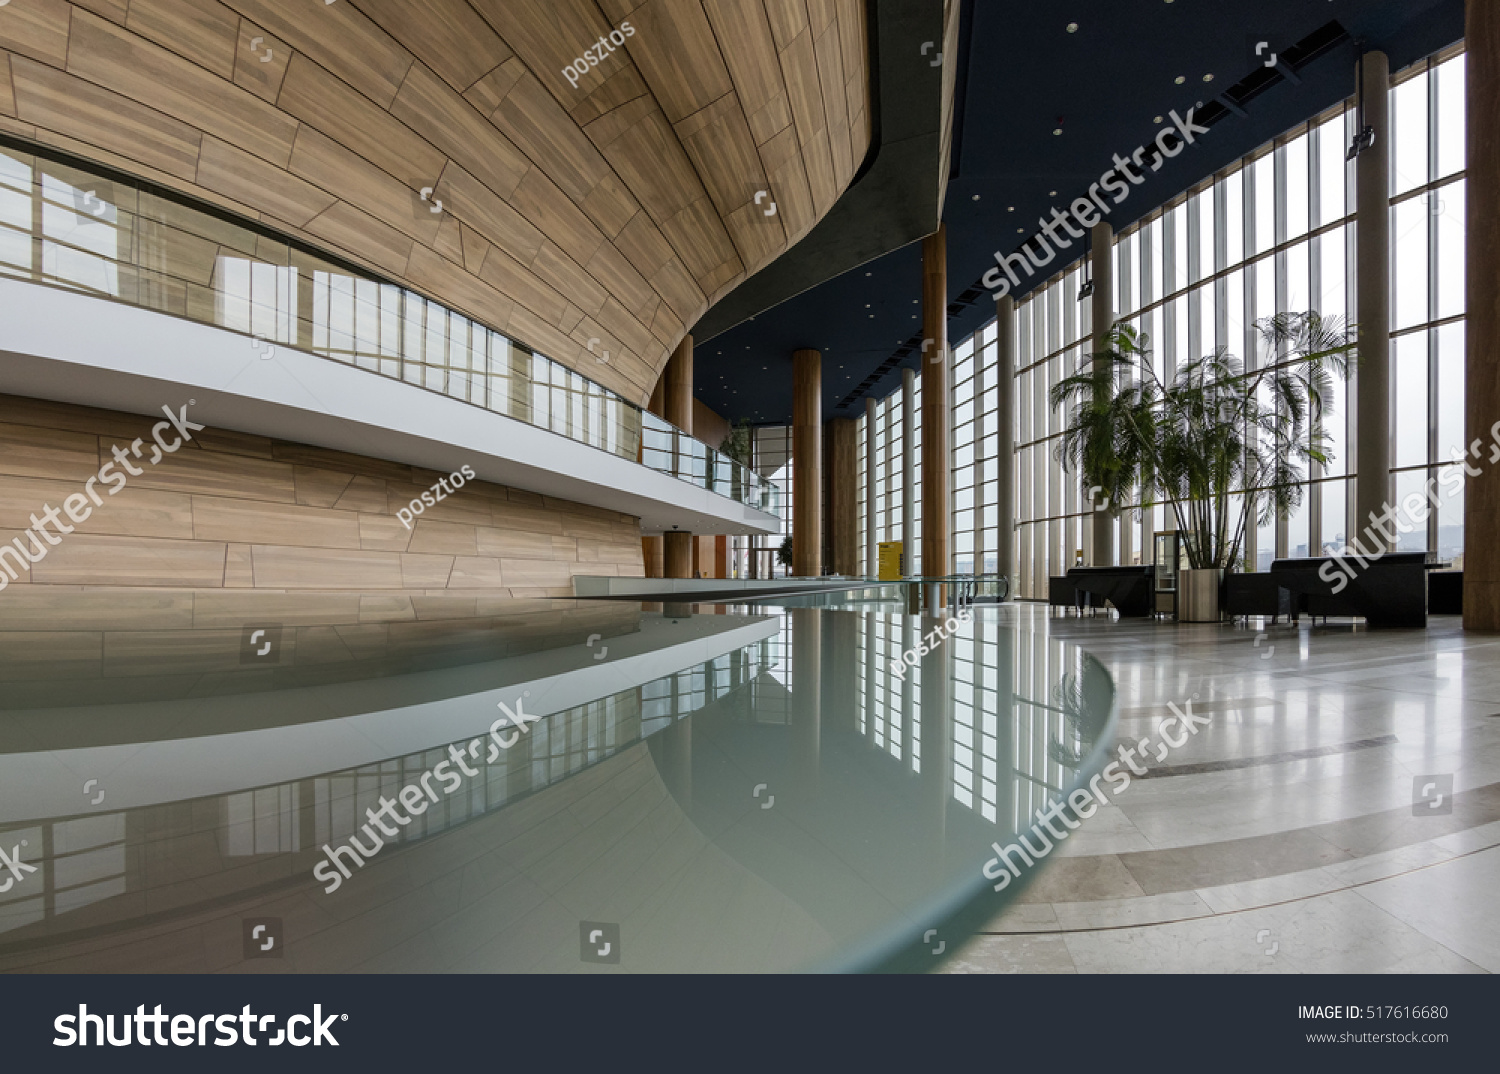 BUDAPEST, HUNGARY - NOVEMBER 17, 2016: Interior of the contemporary building Palace of Arts (MUPA). MUPA is the most popular music hall and cultural center in Budapest, officially opened in March 2005 #517616680